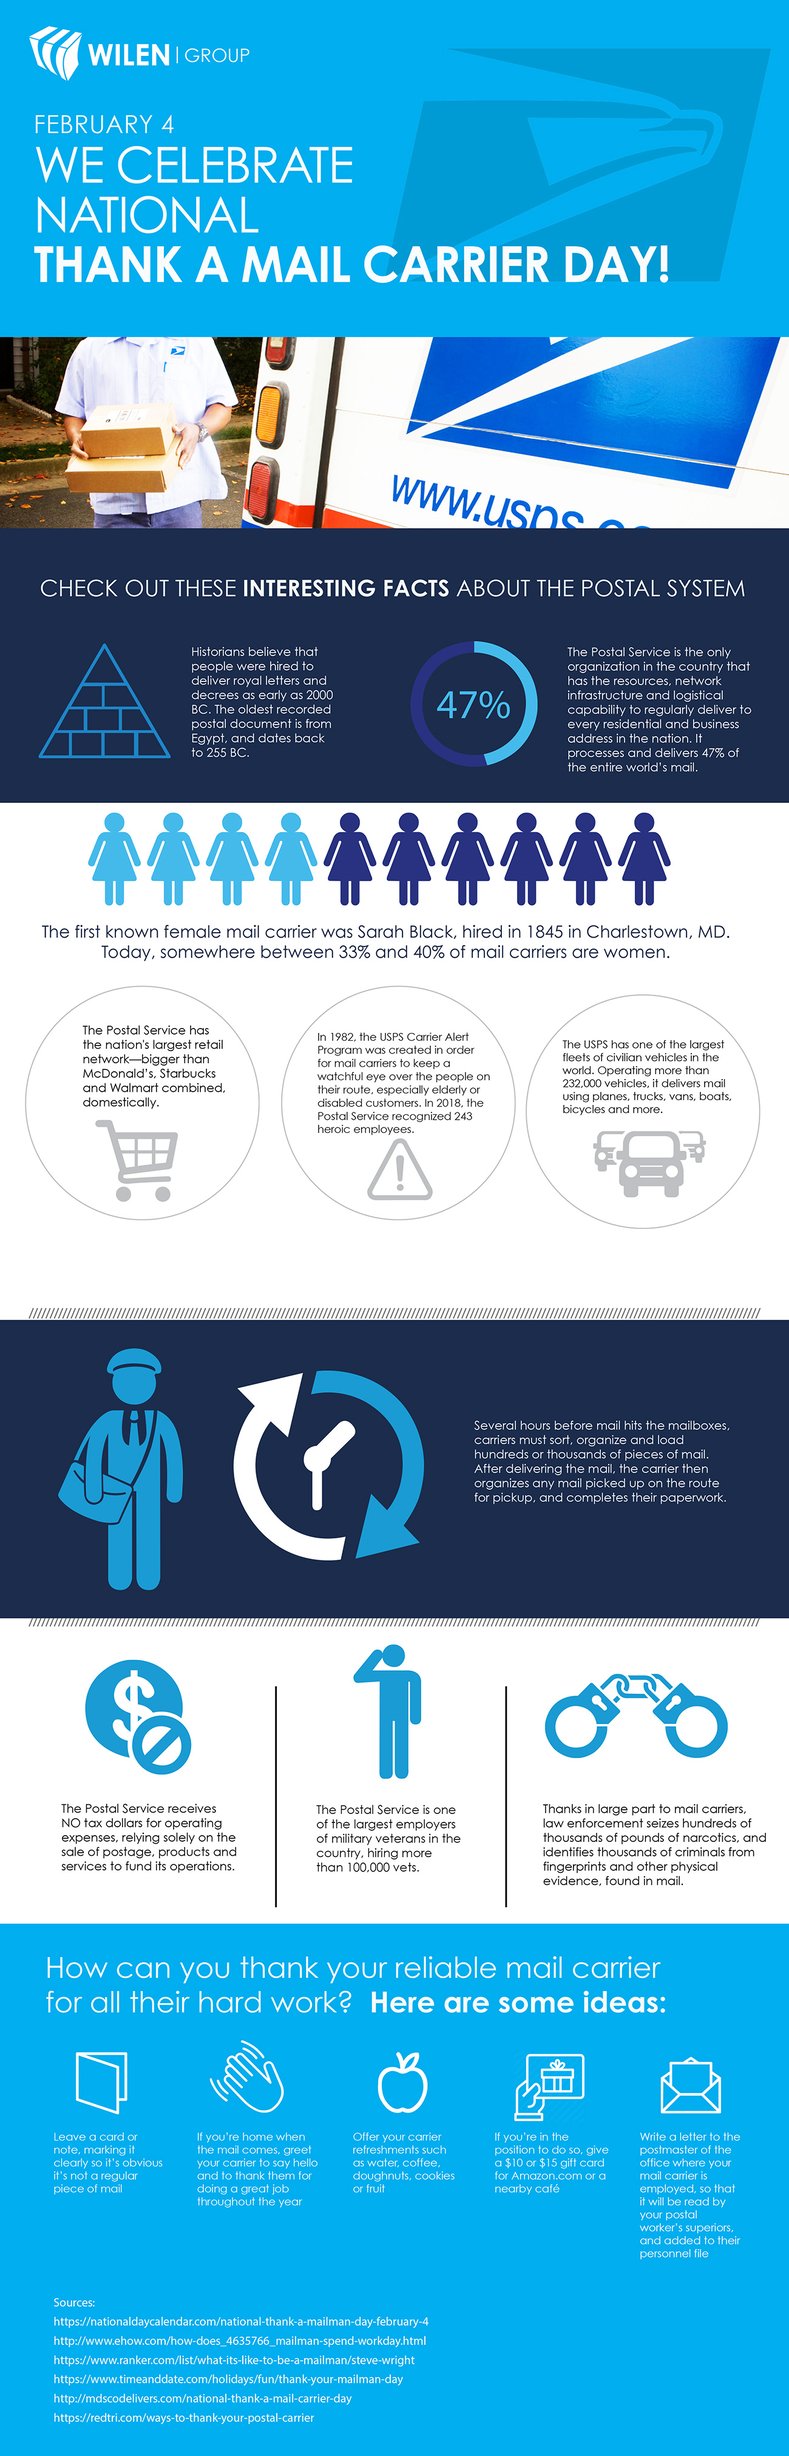 National Thank a Mail Carrier Day Infographic